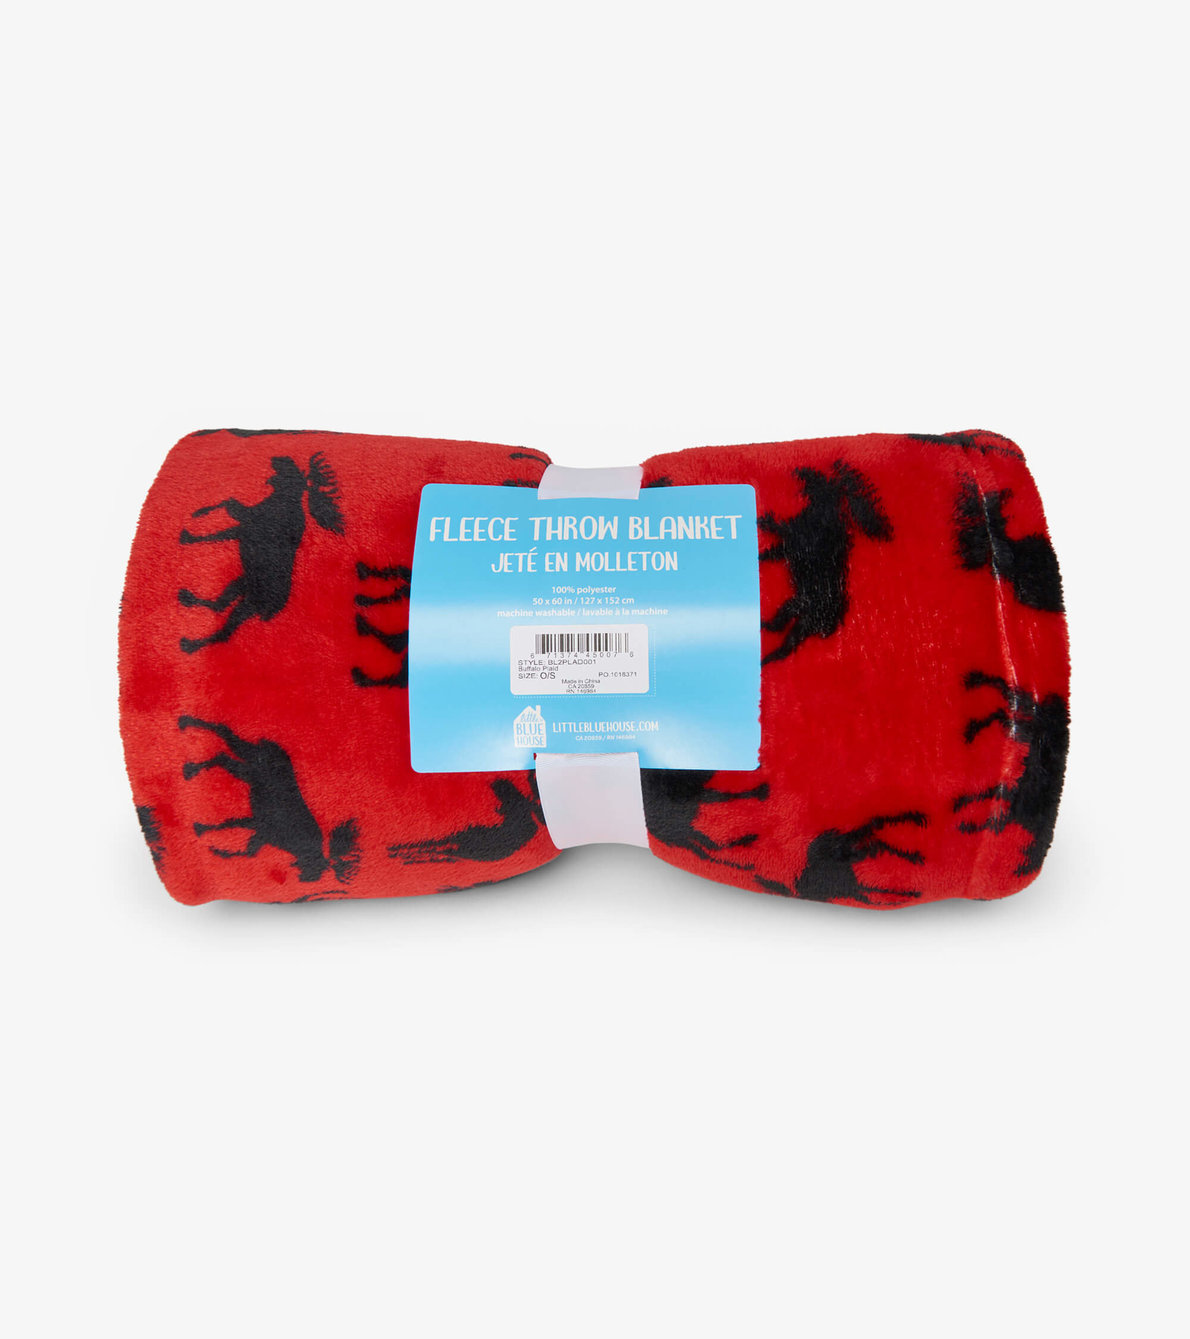 View larger image of Moose On Red Fleece Blanket